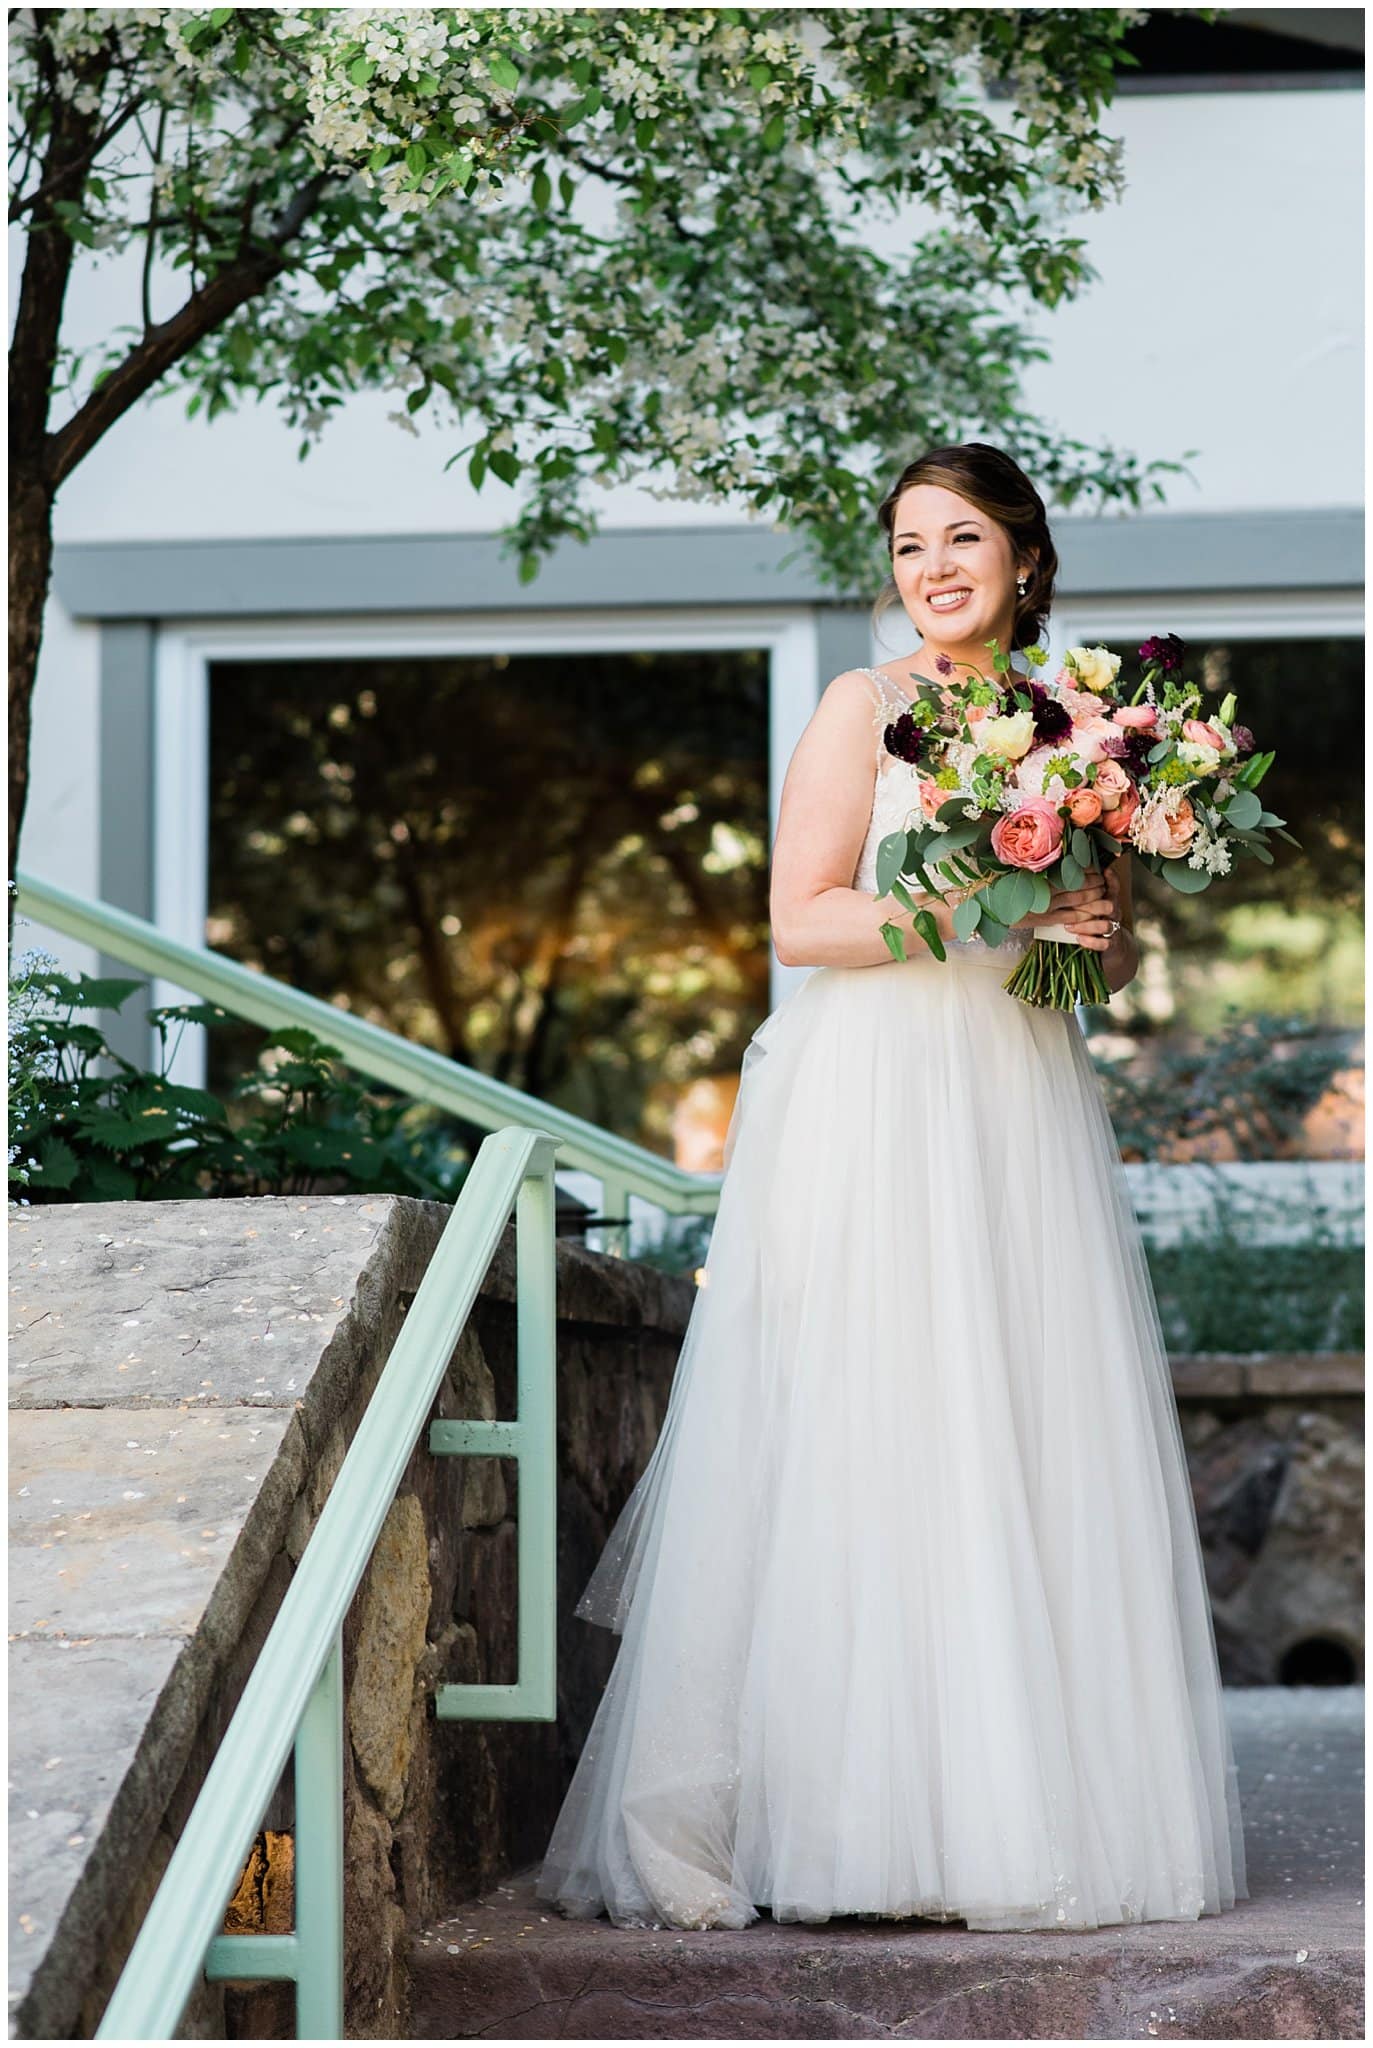 BHLDN dress and Vintage Magnolia flowers at Sonnenalp Hotel Vail Colorado Wedding by Vail Wedding Photographer Jennie Crate